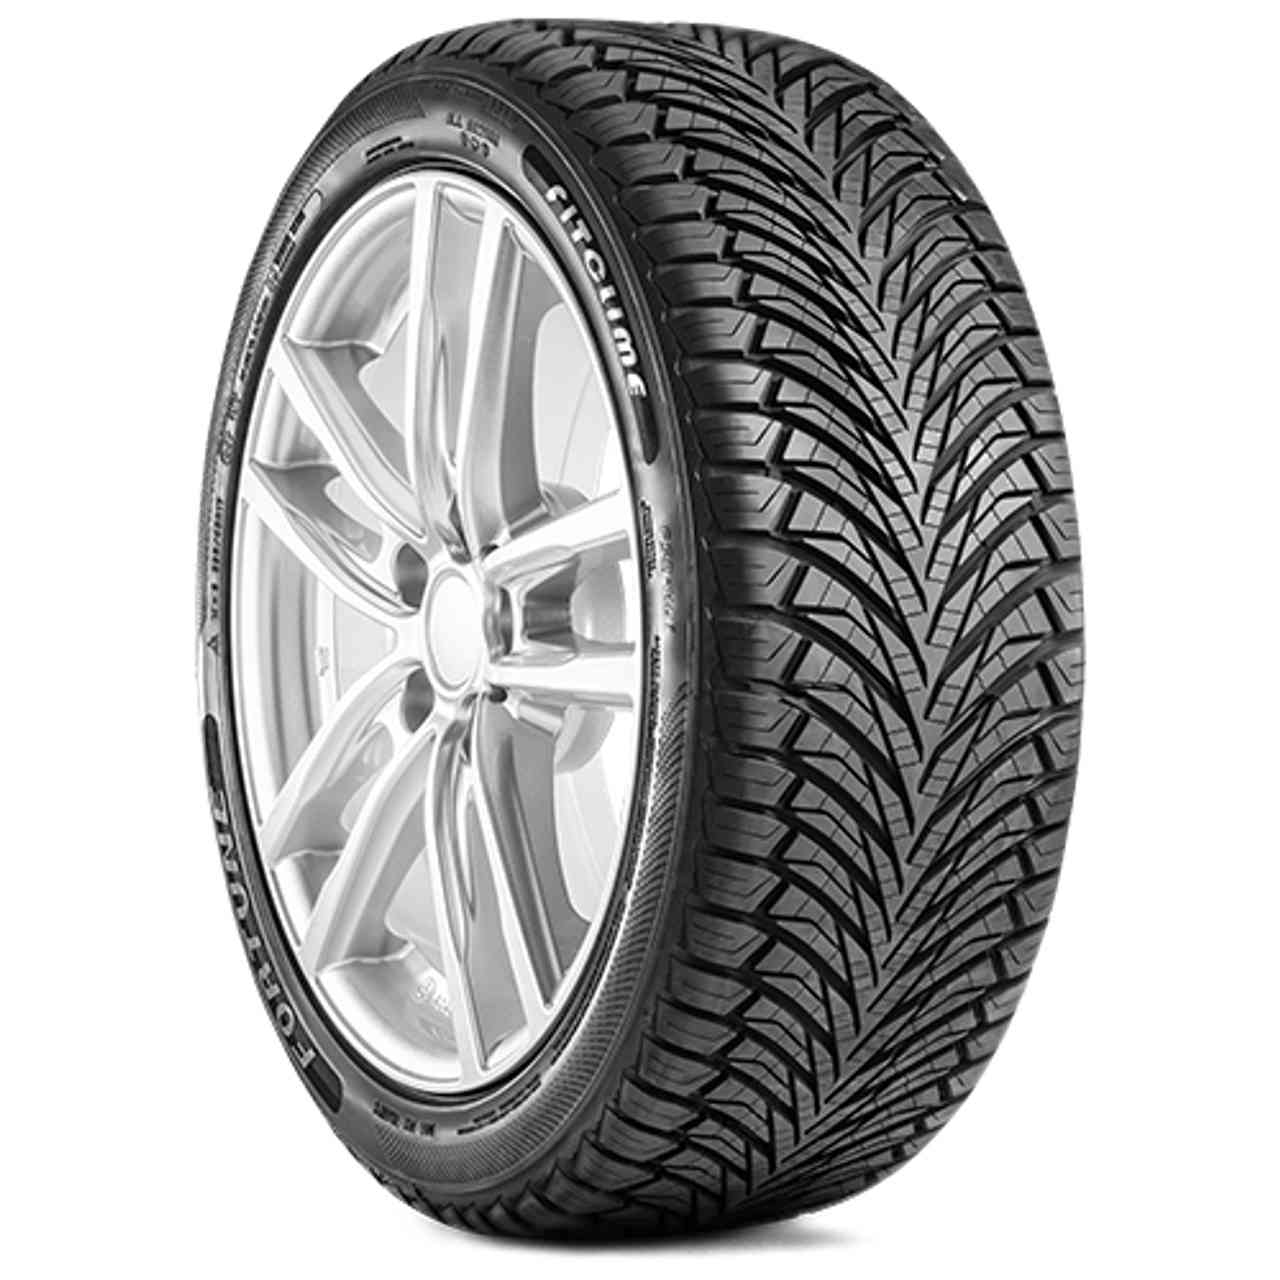 FORTUNE FITCLIME FSR-401 155/65R14 75T BSW